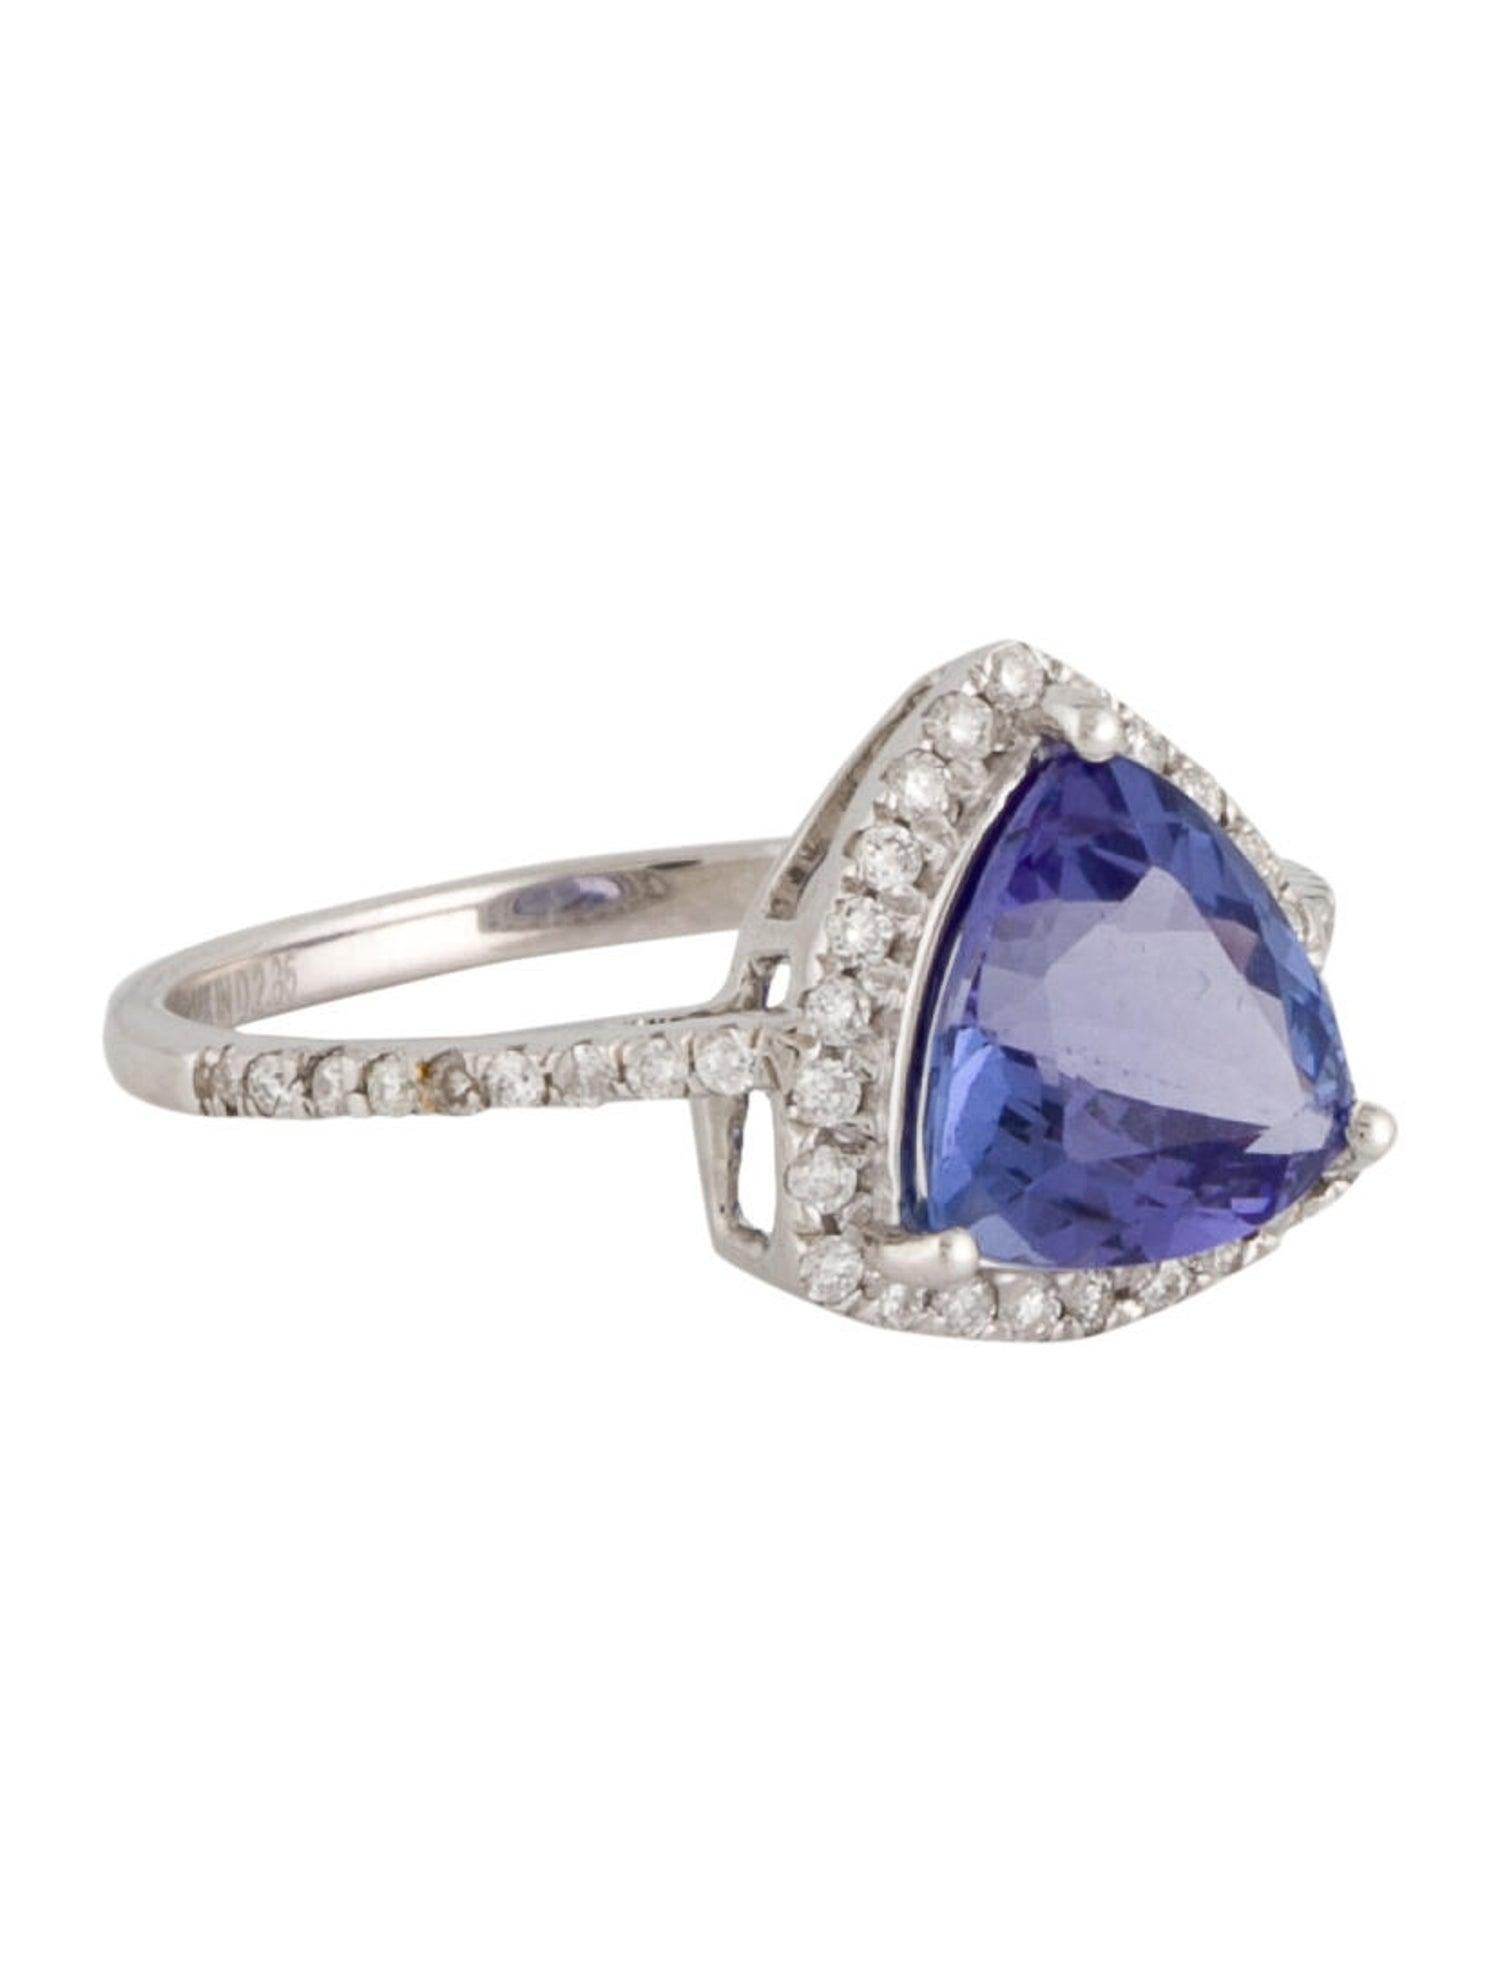 Introducing our 14K White Gold Cocktail Ring, a masterpiece that marries modern elegance with timeless design. At its heart lies a captivating 2.15 carat faceted triangular Tanzanite, boasting a deep purple hue that enchants at first glance. This